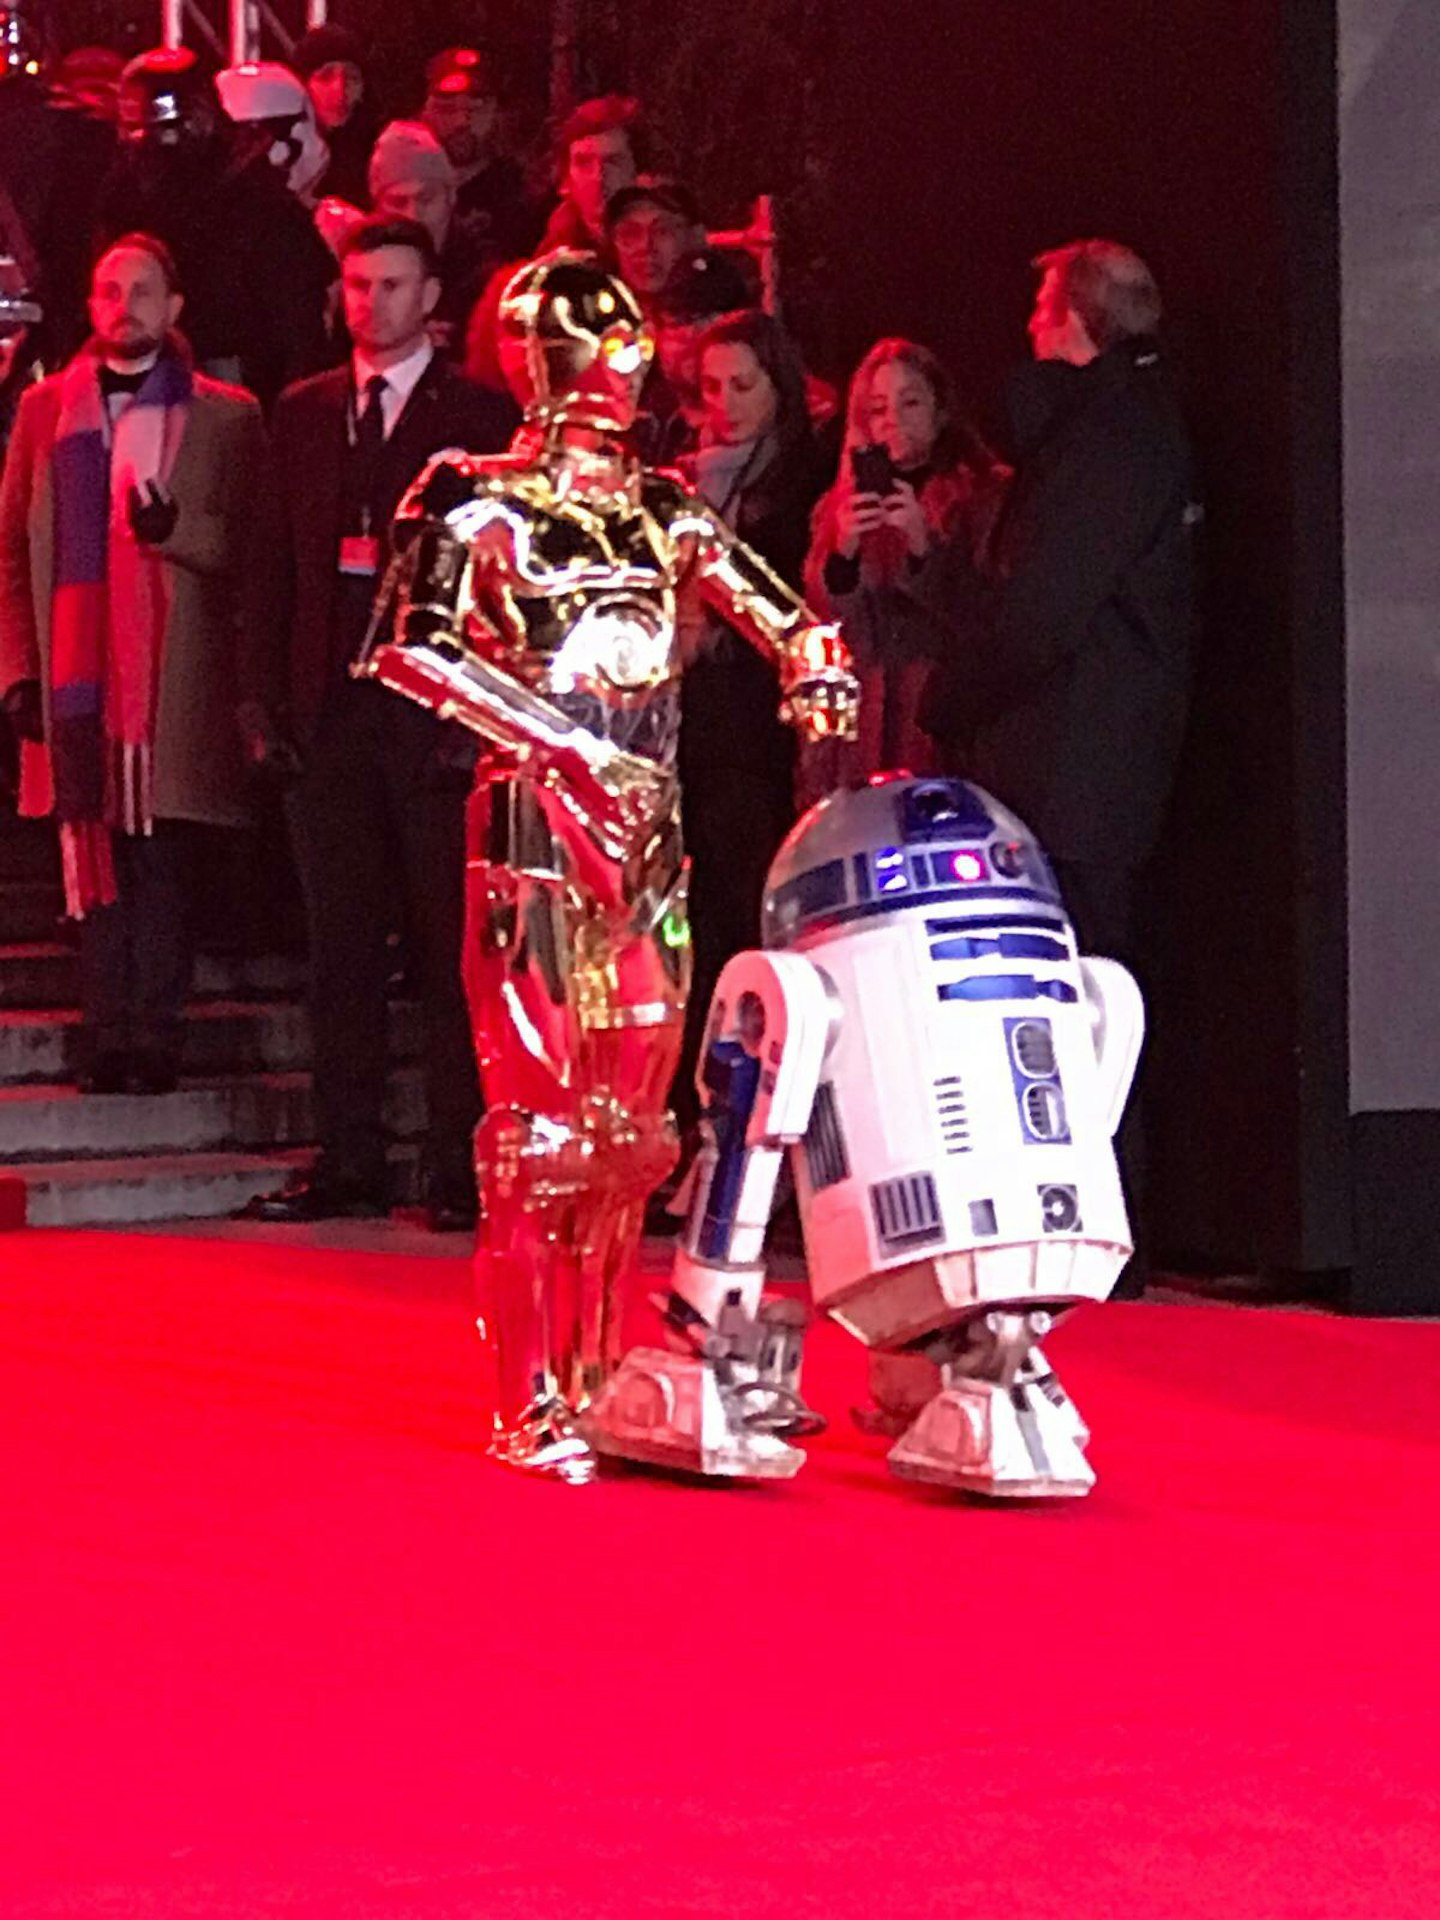 C-3PO and R2D2